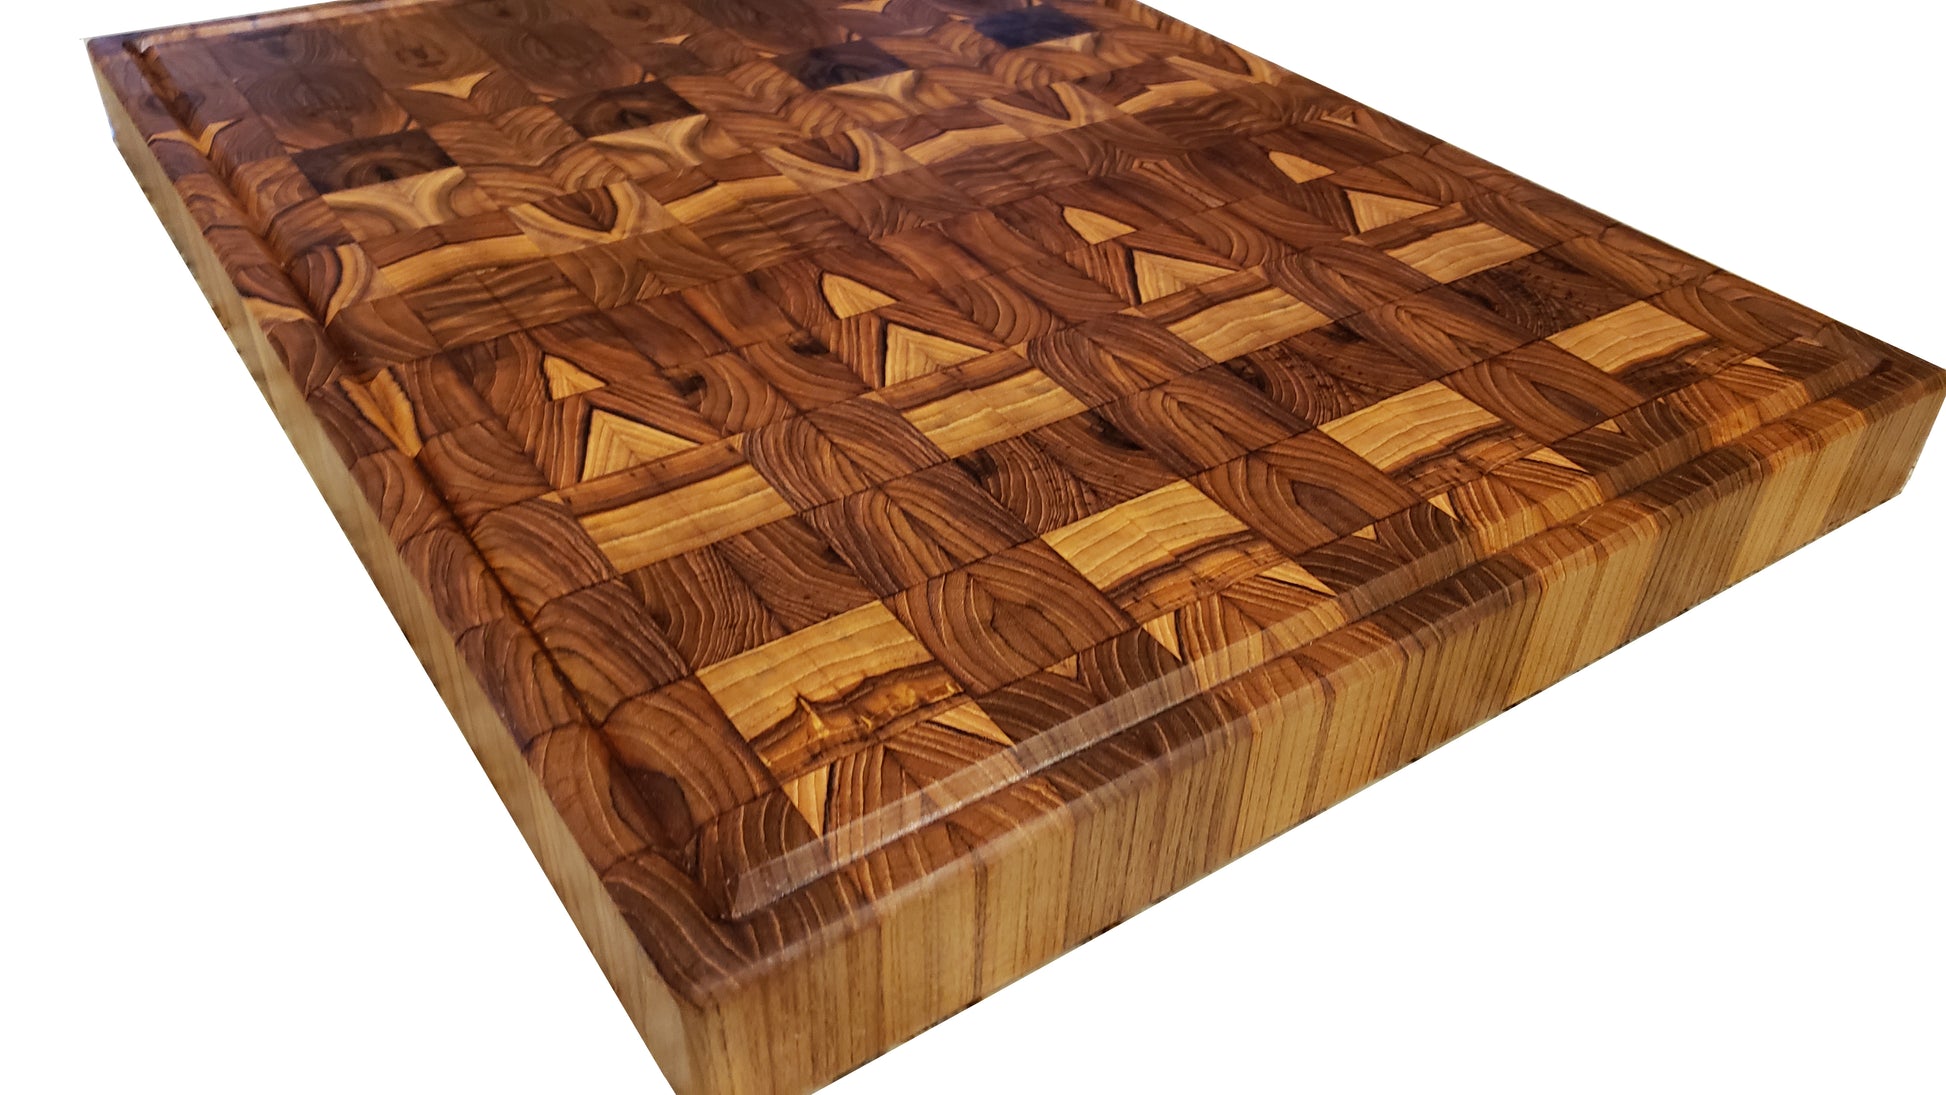 TeakCraft Large Walnut Cutting Board with Sorting Compartment and Juic